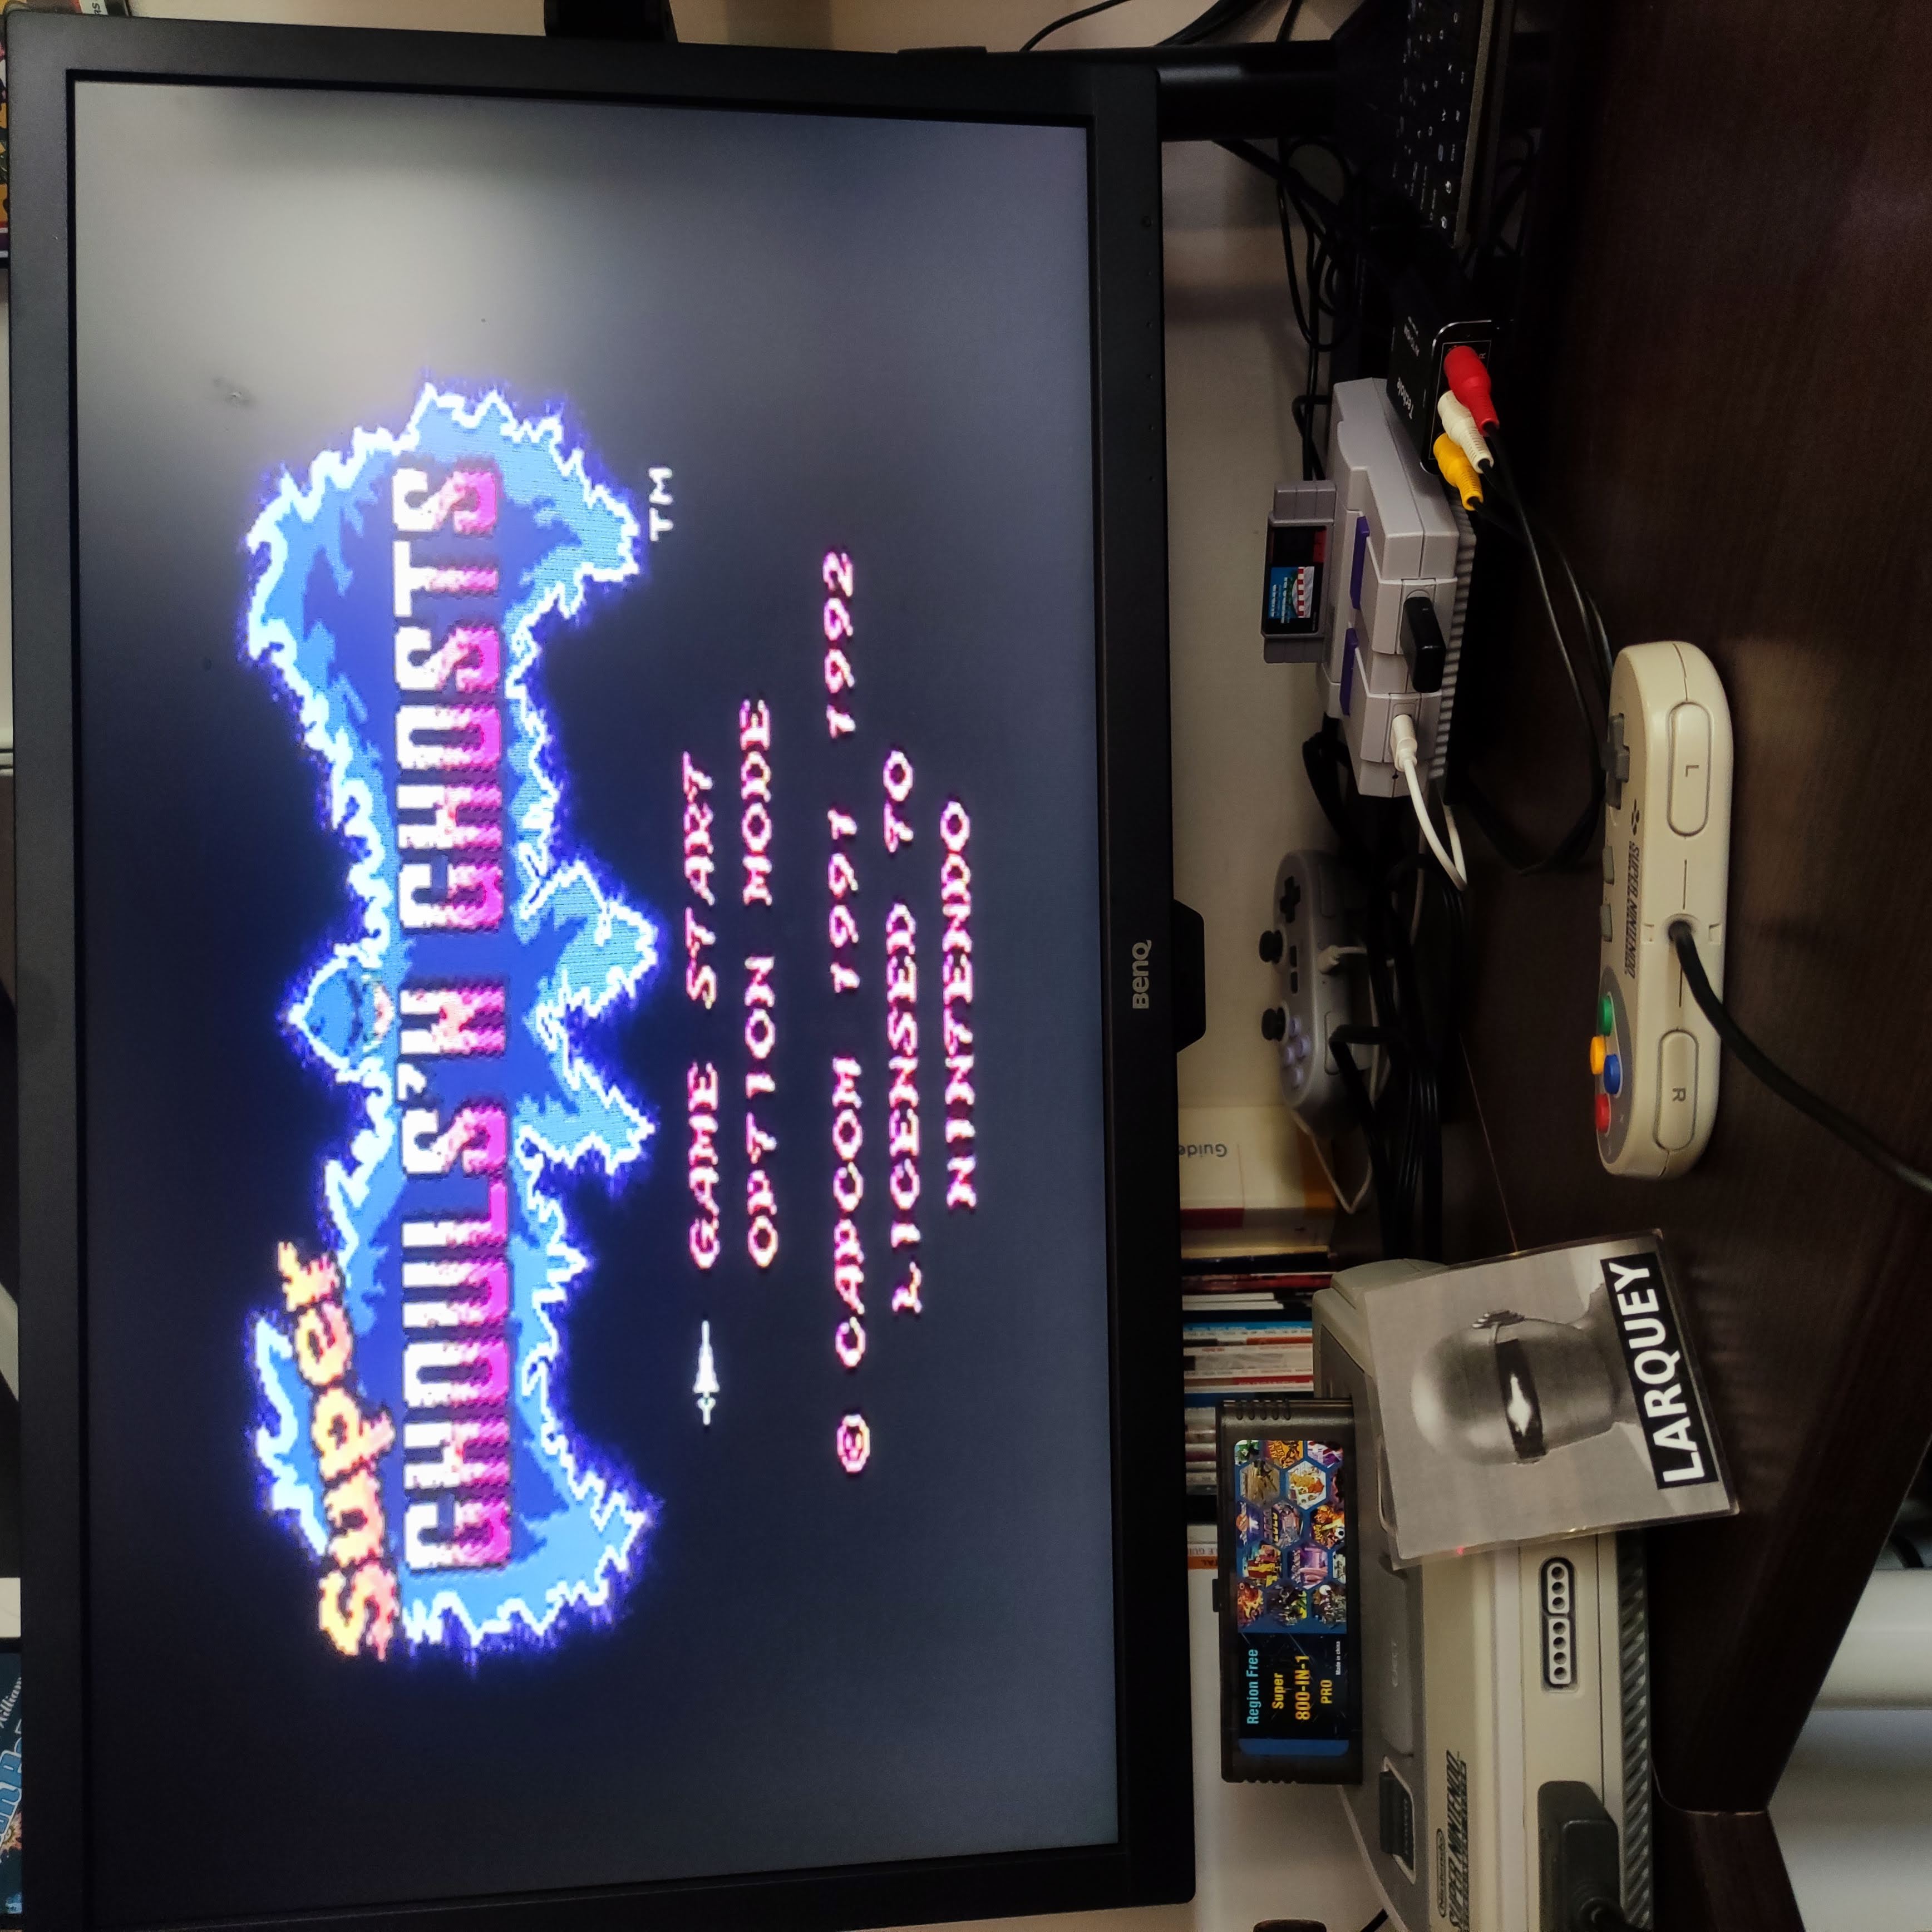 Larquey: Super Ghouls N Ghosts (SNES/Super Famicom) 87,500 points on 2022-07-14 01:17:43